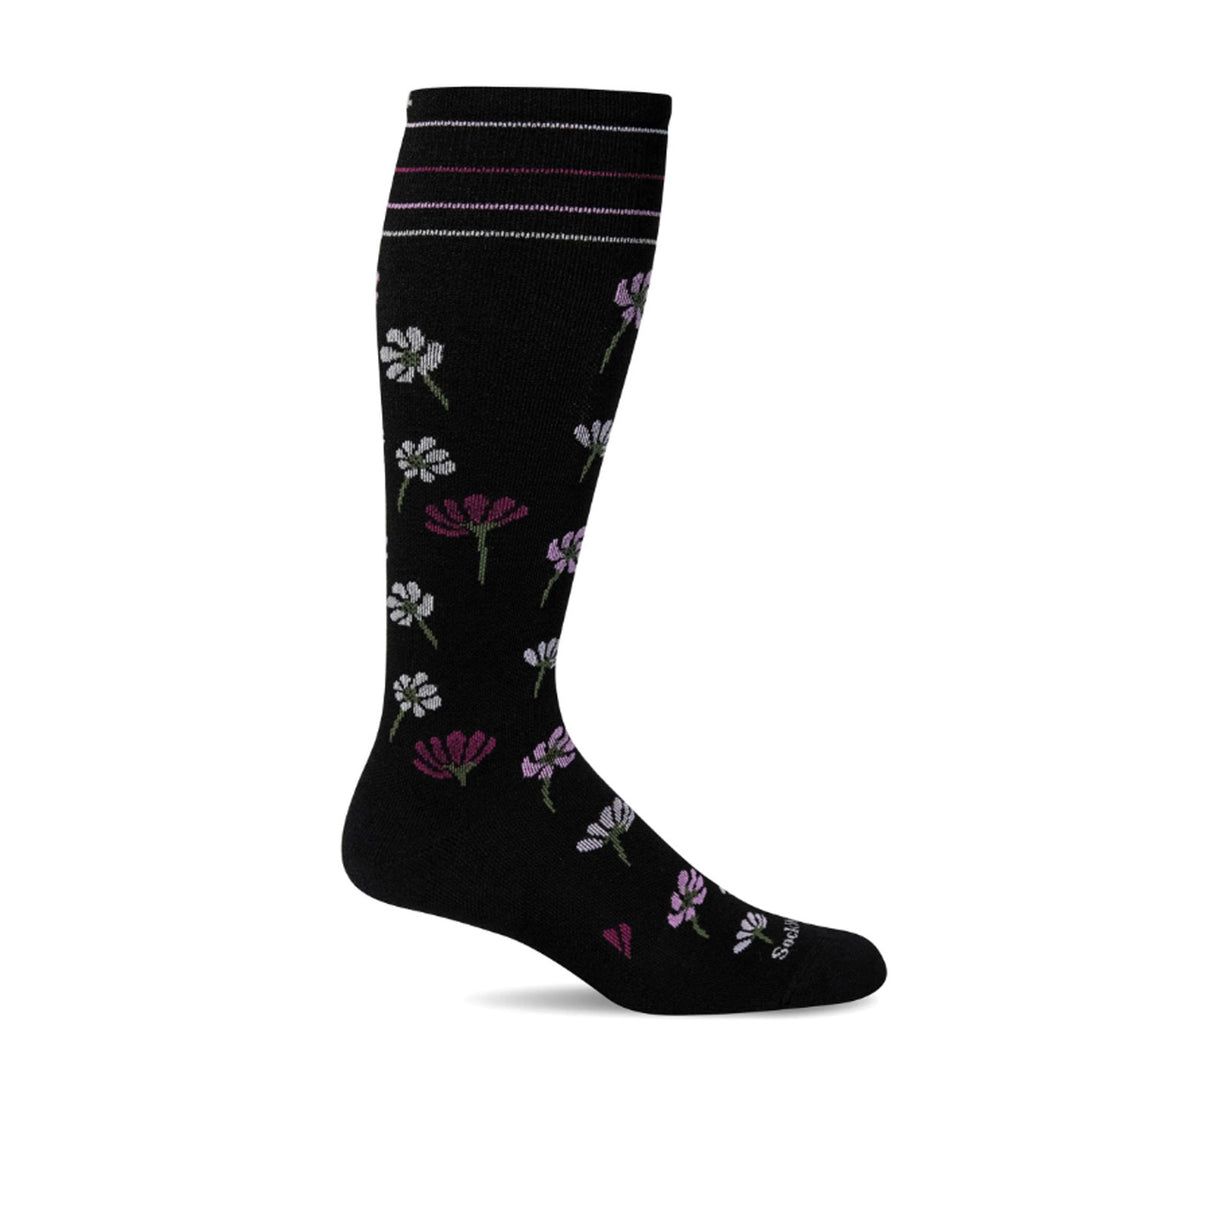 Sockwell Field Flower Over the Calf Compression Sock (Women) - Black Accessories - Socks - Compression - The Heel Shoe Fitters